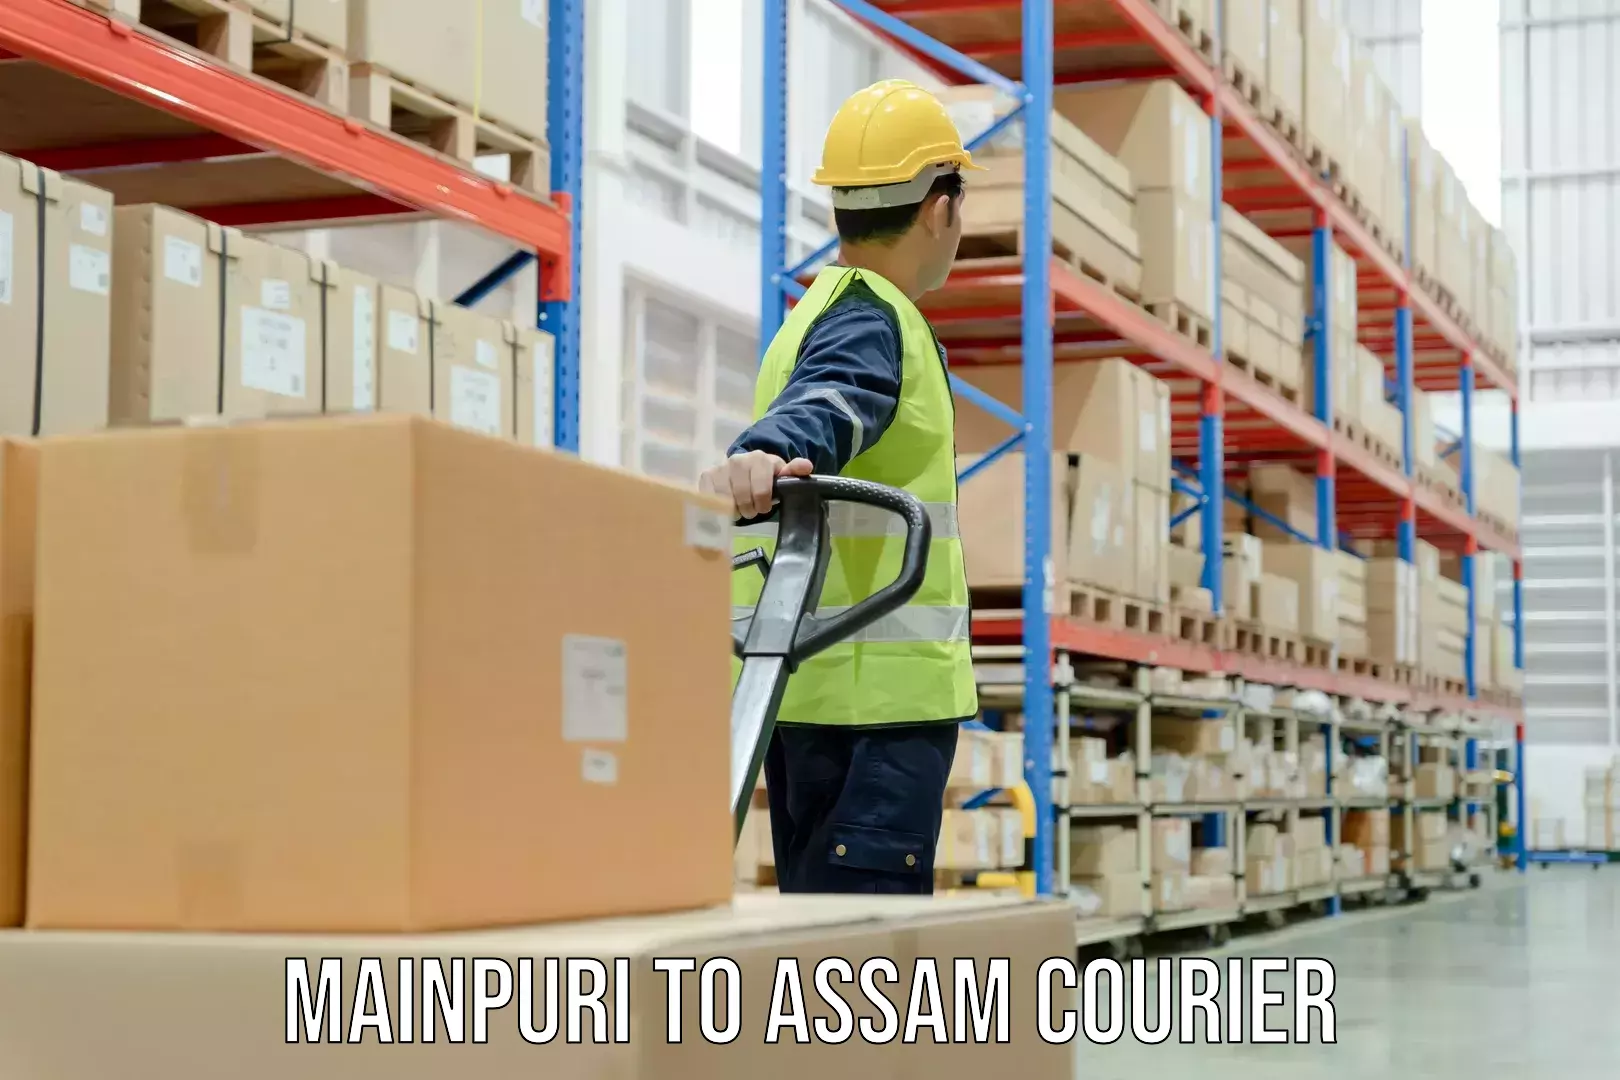 Global courier networks Mainpuri to Assam